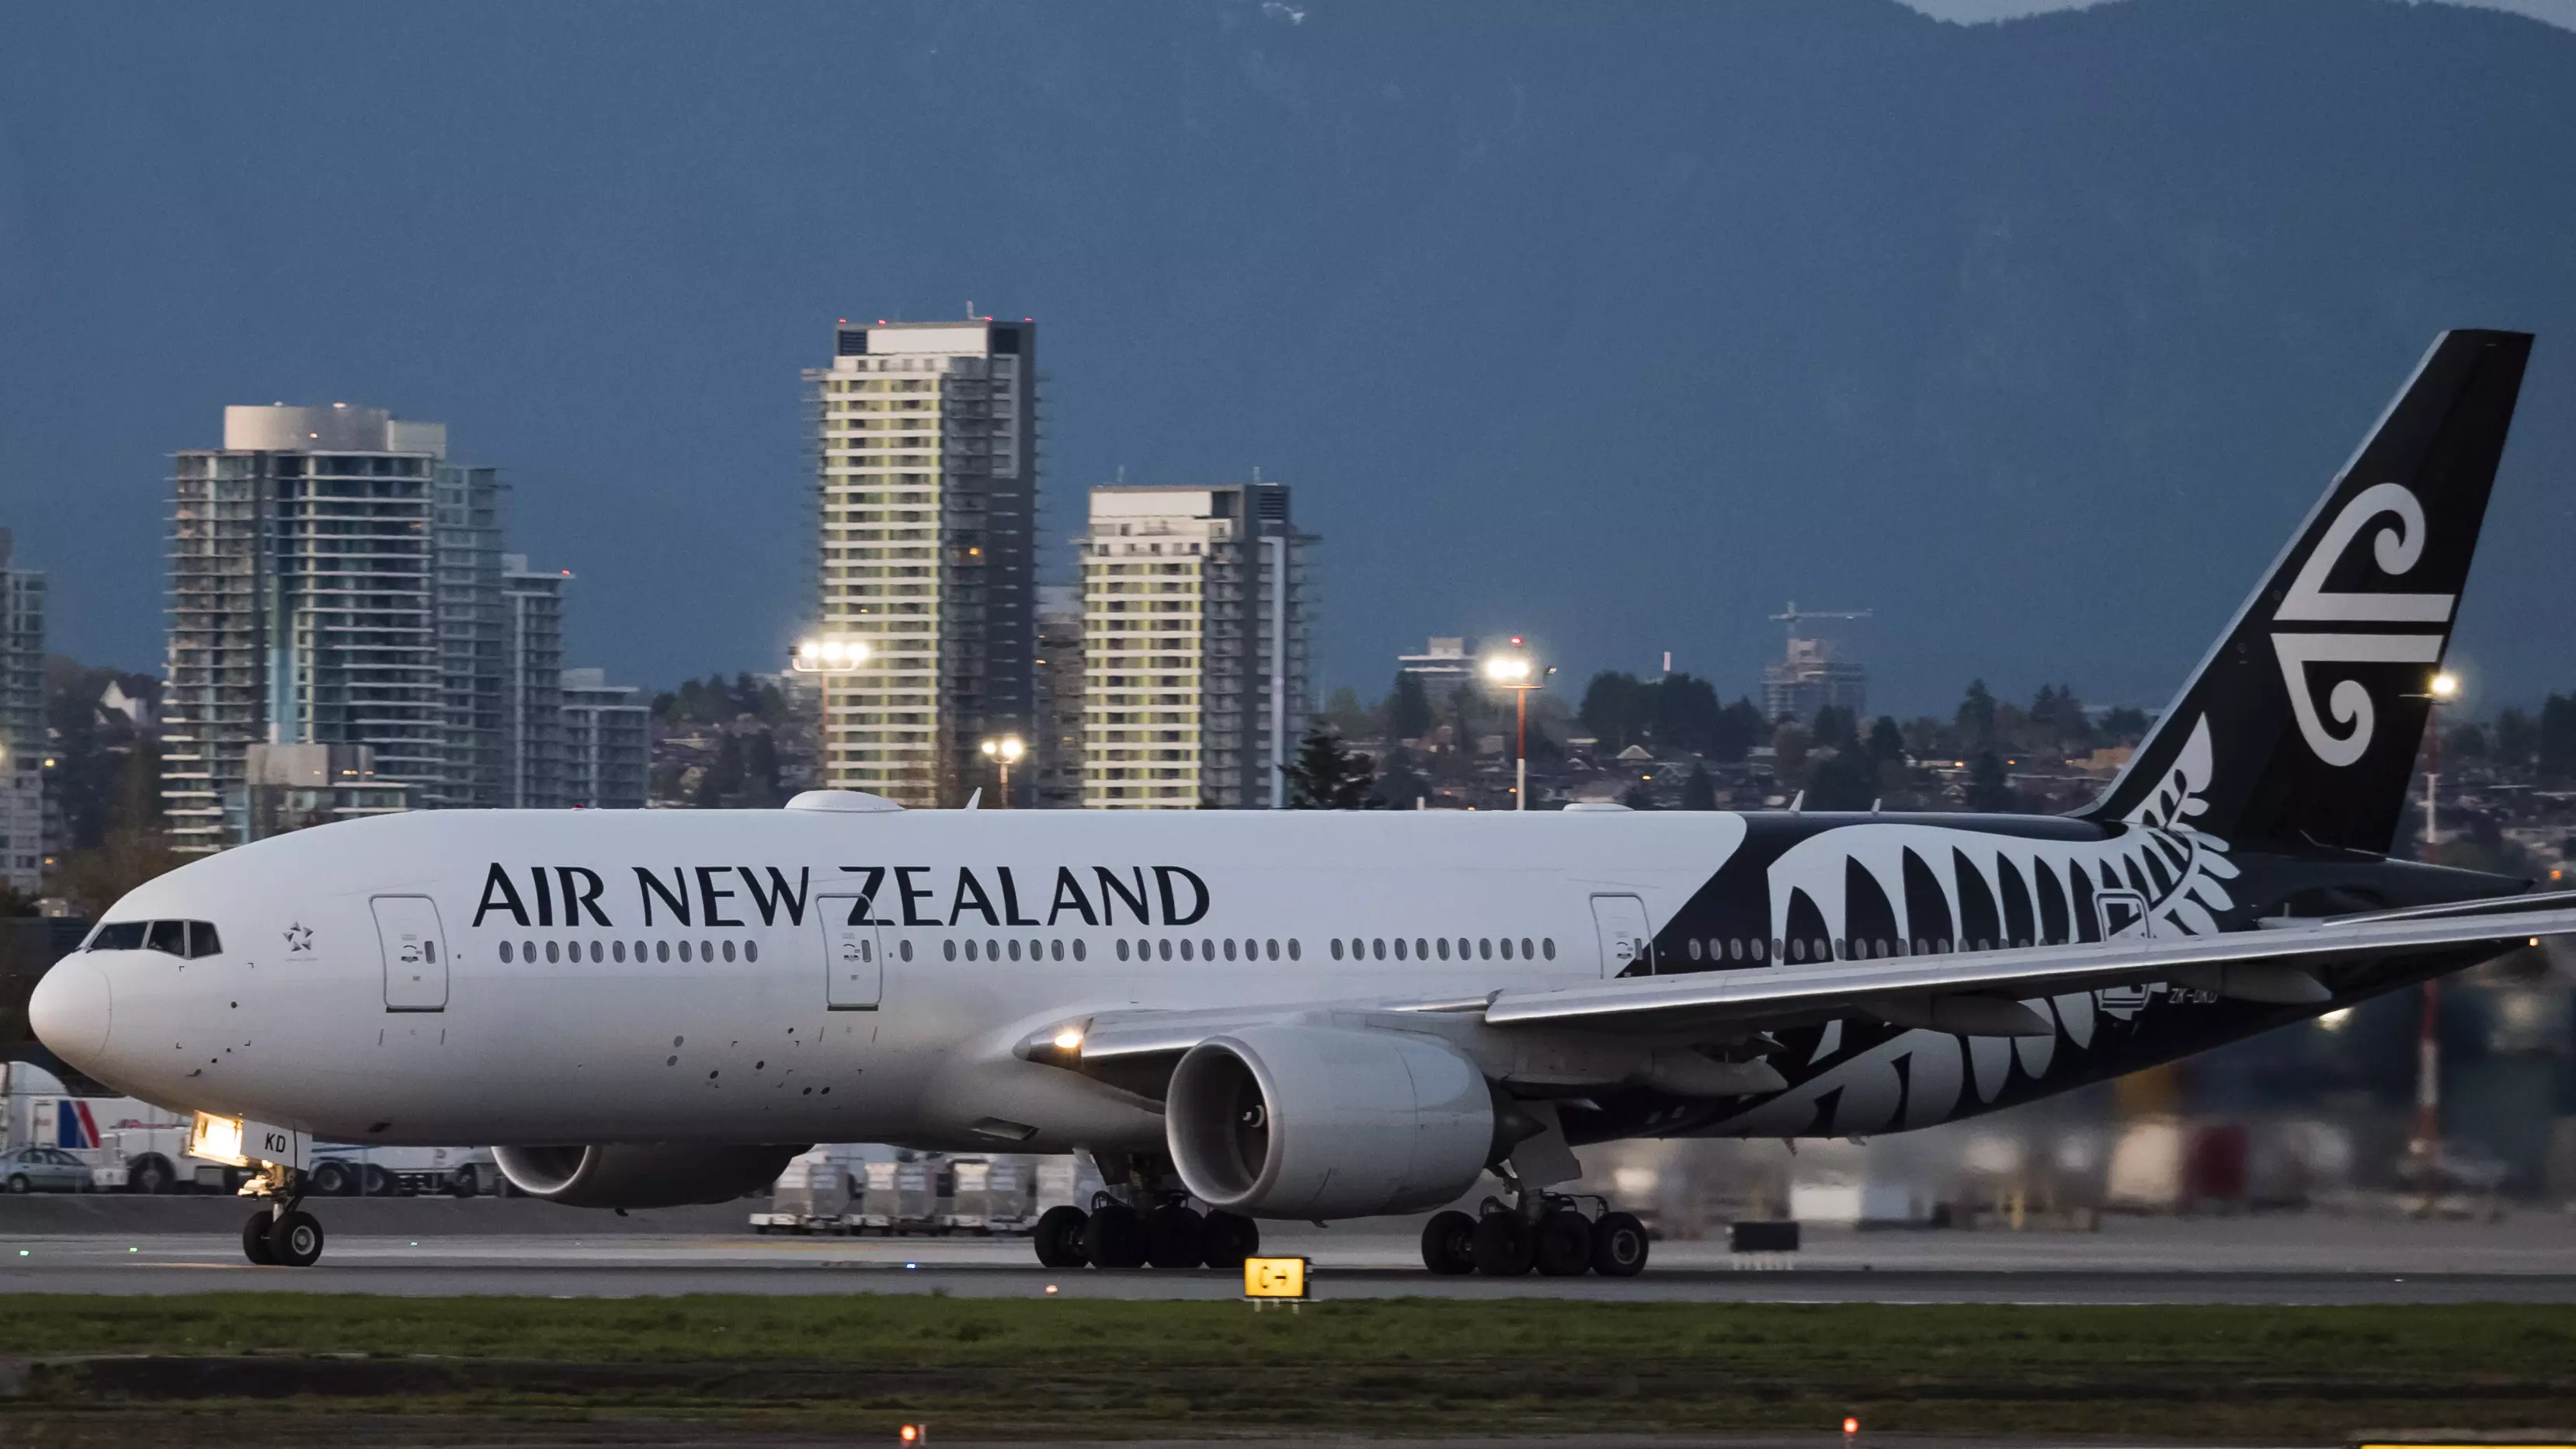 Air New Zealand Lifts Ban On Visible Maori Tattoos For Staff